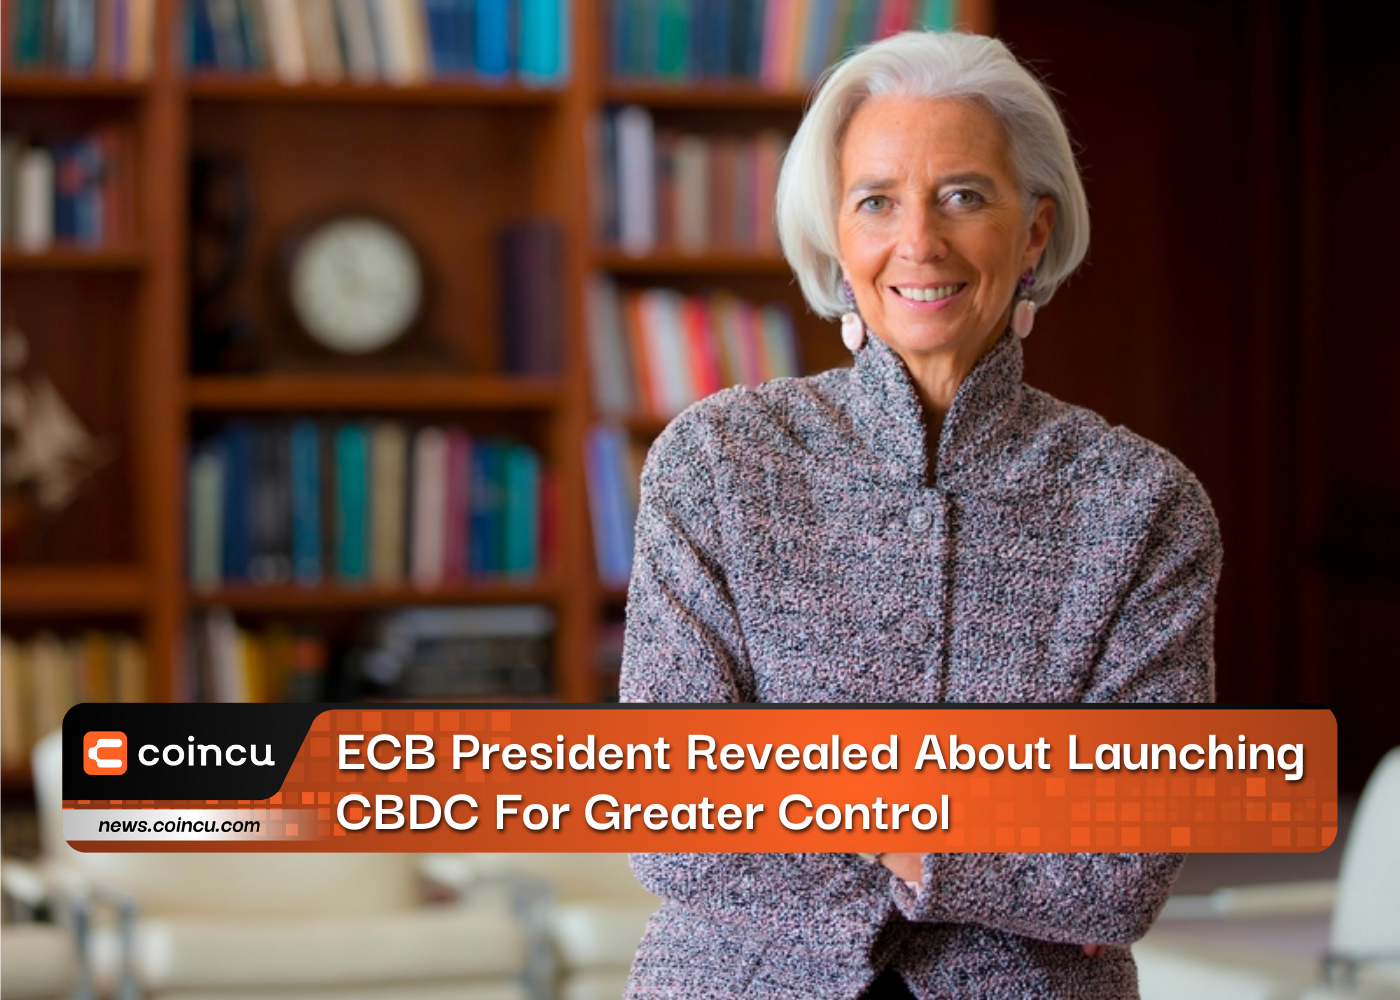 ECB President Revealed About Launching CBDC For Greater Control